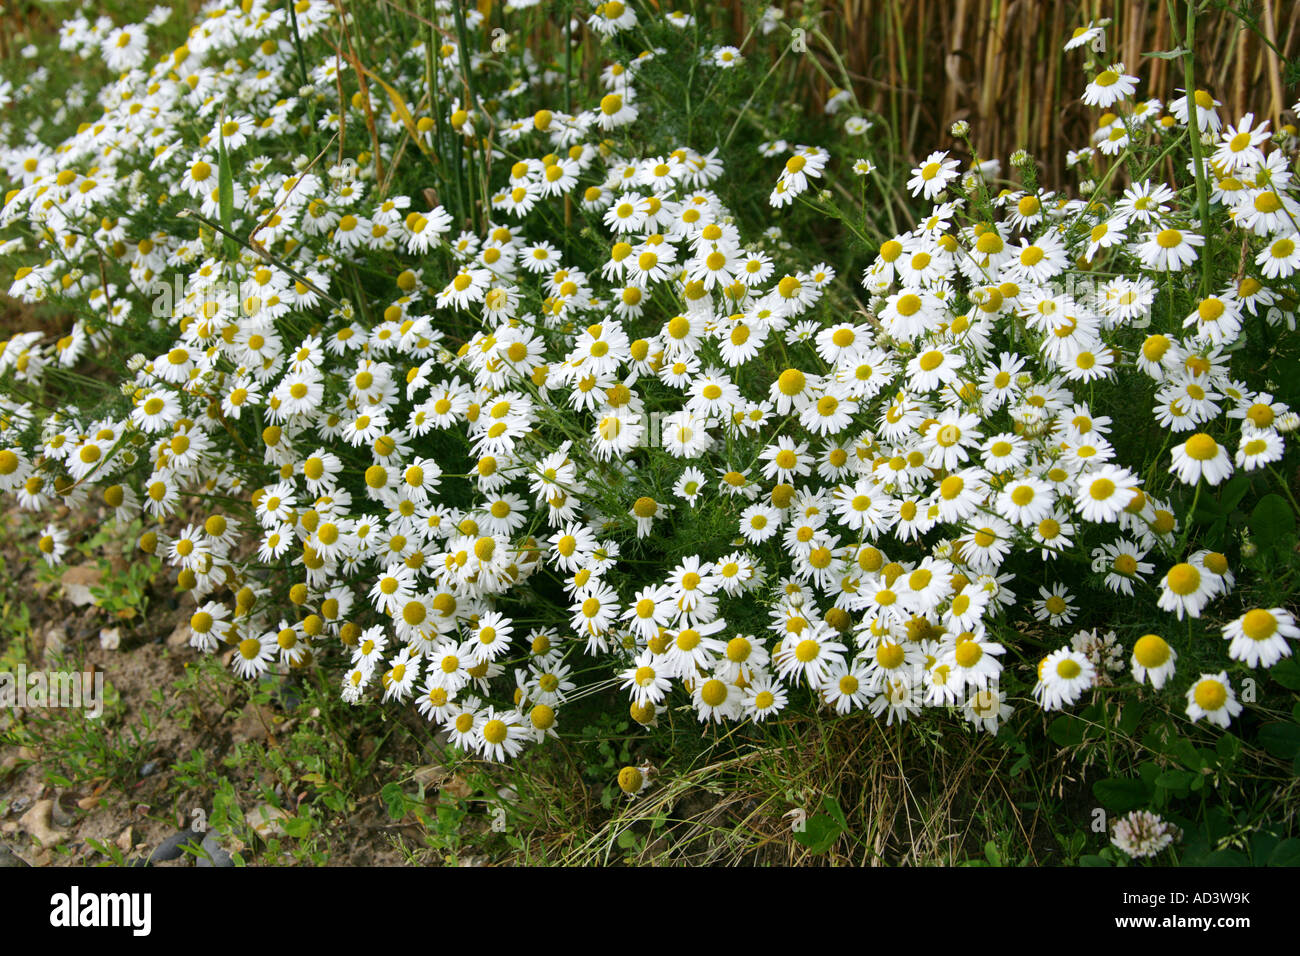 Scentless Mayweed, Matricaria perforata or Tripleurospermum inodorum or  Tripleurospermum perforatum, Asteraceae Stock Photo - Alamy